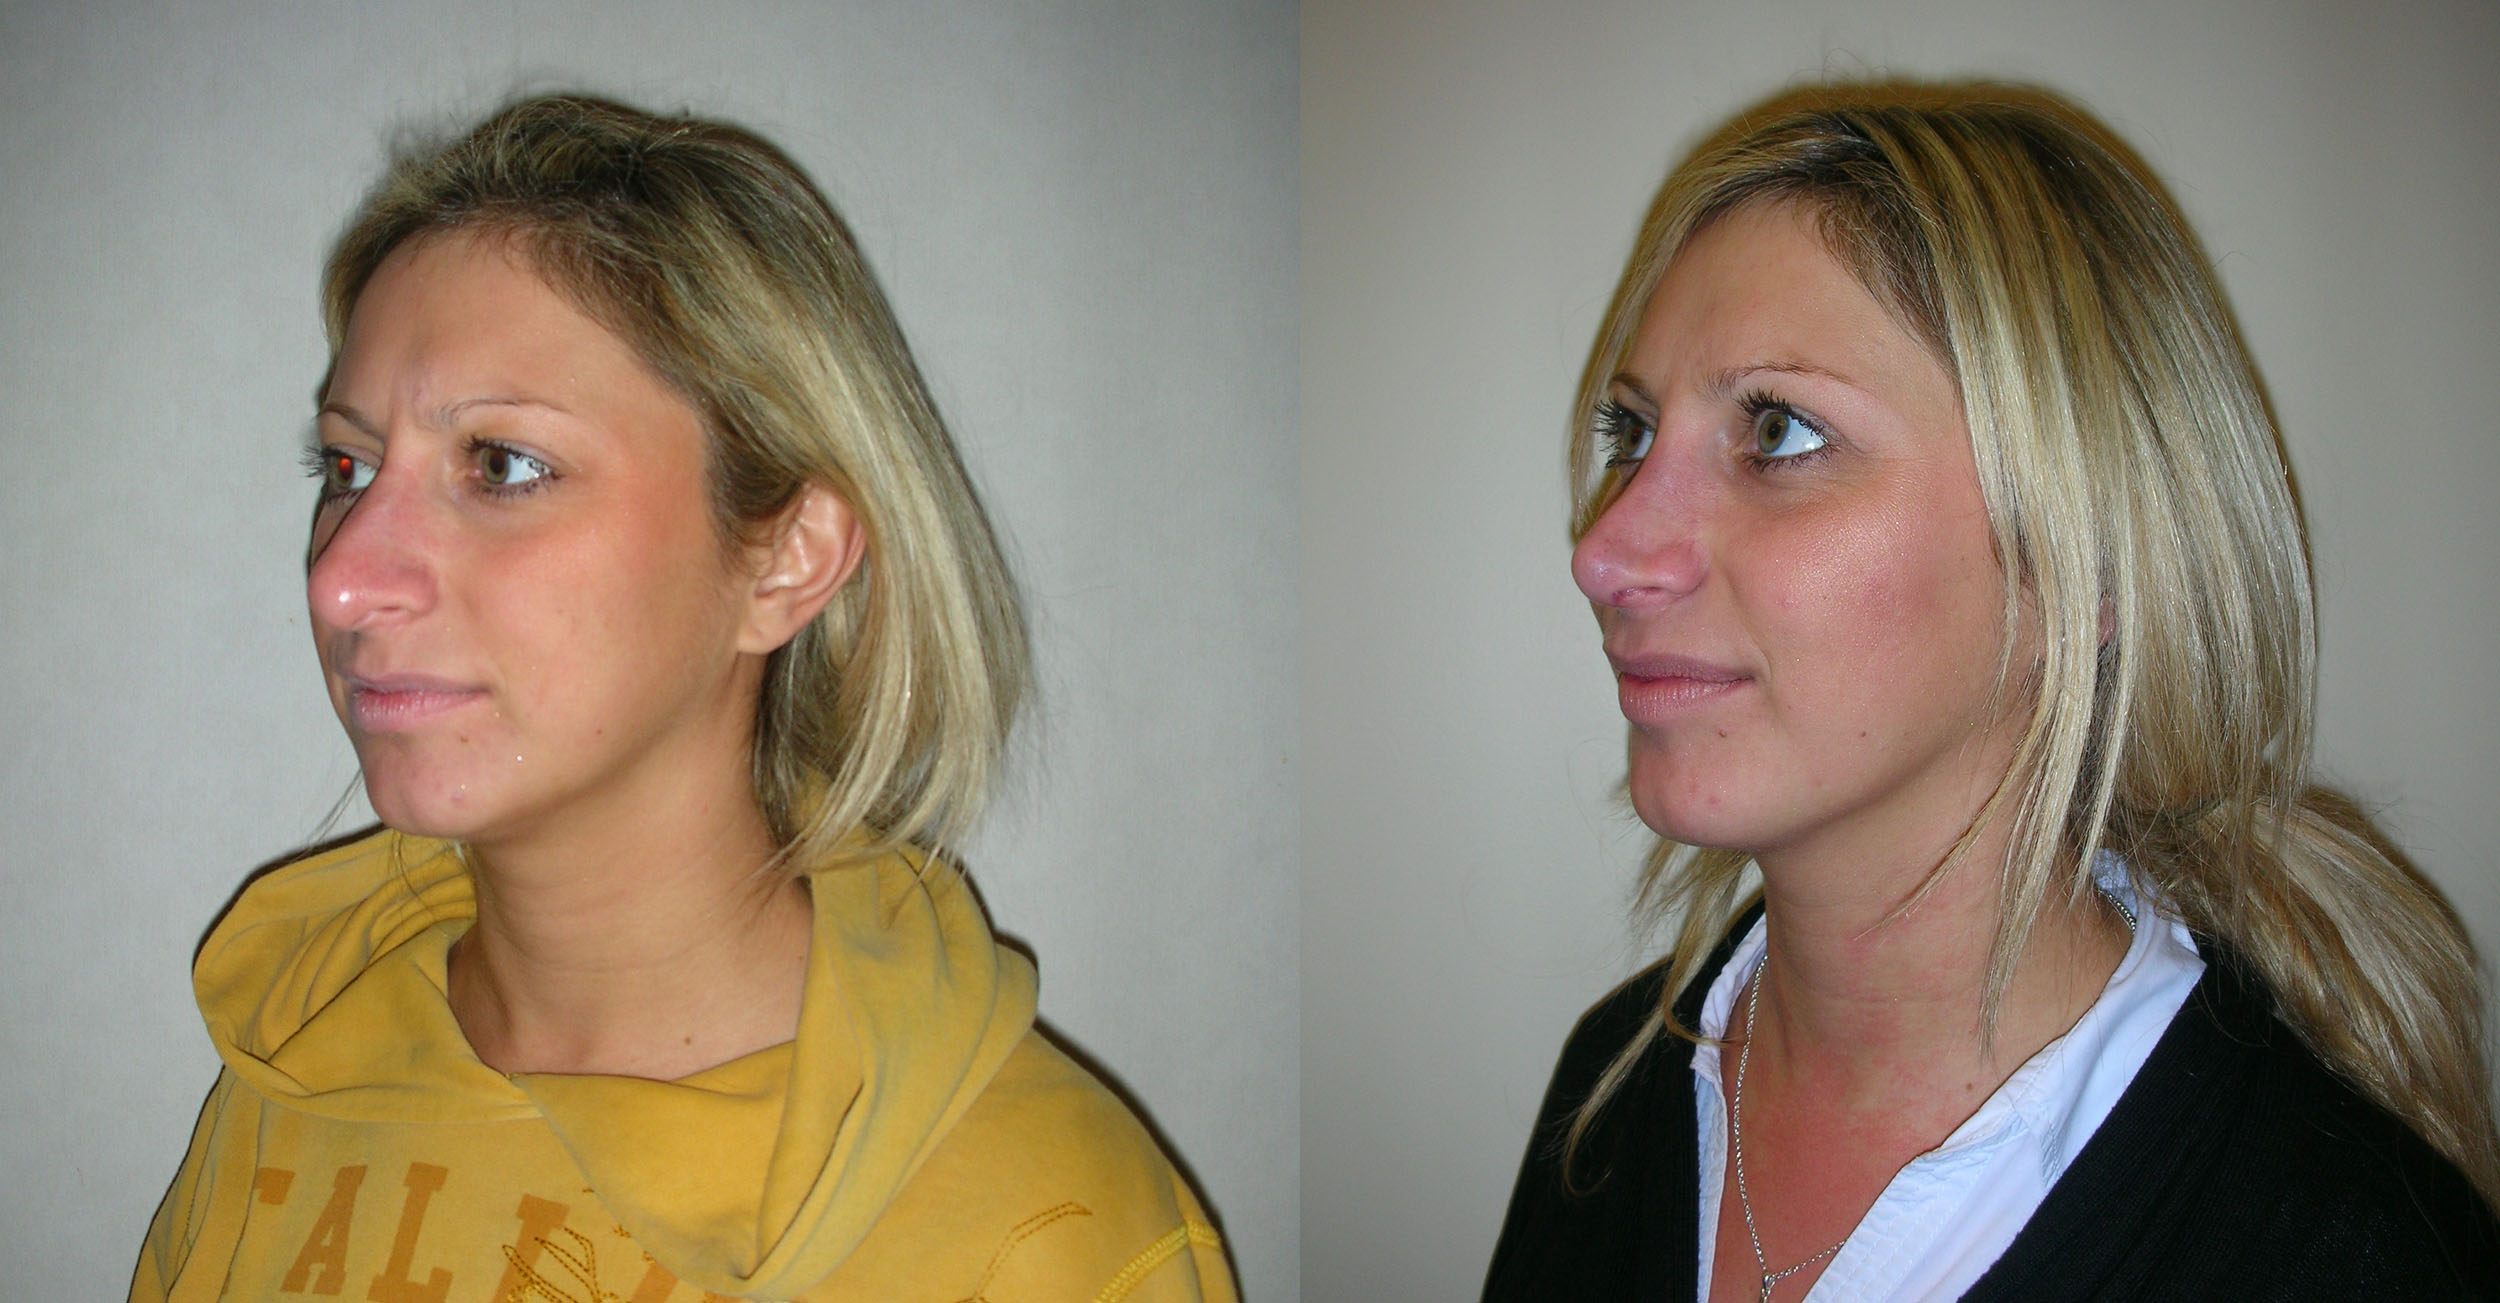 Rhinoplasty / Nose Job surgery in Manchester and London